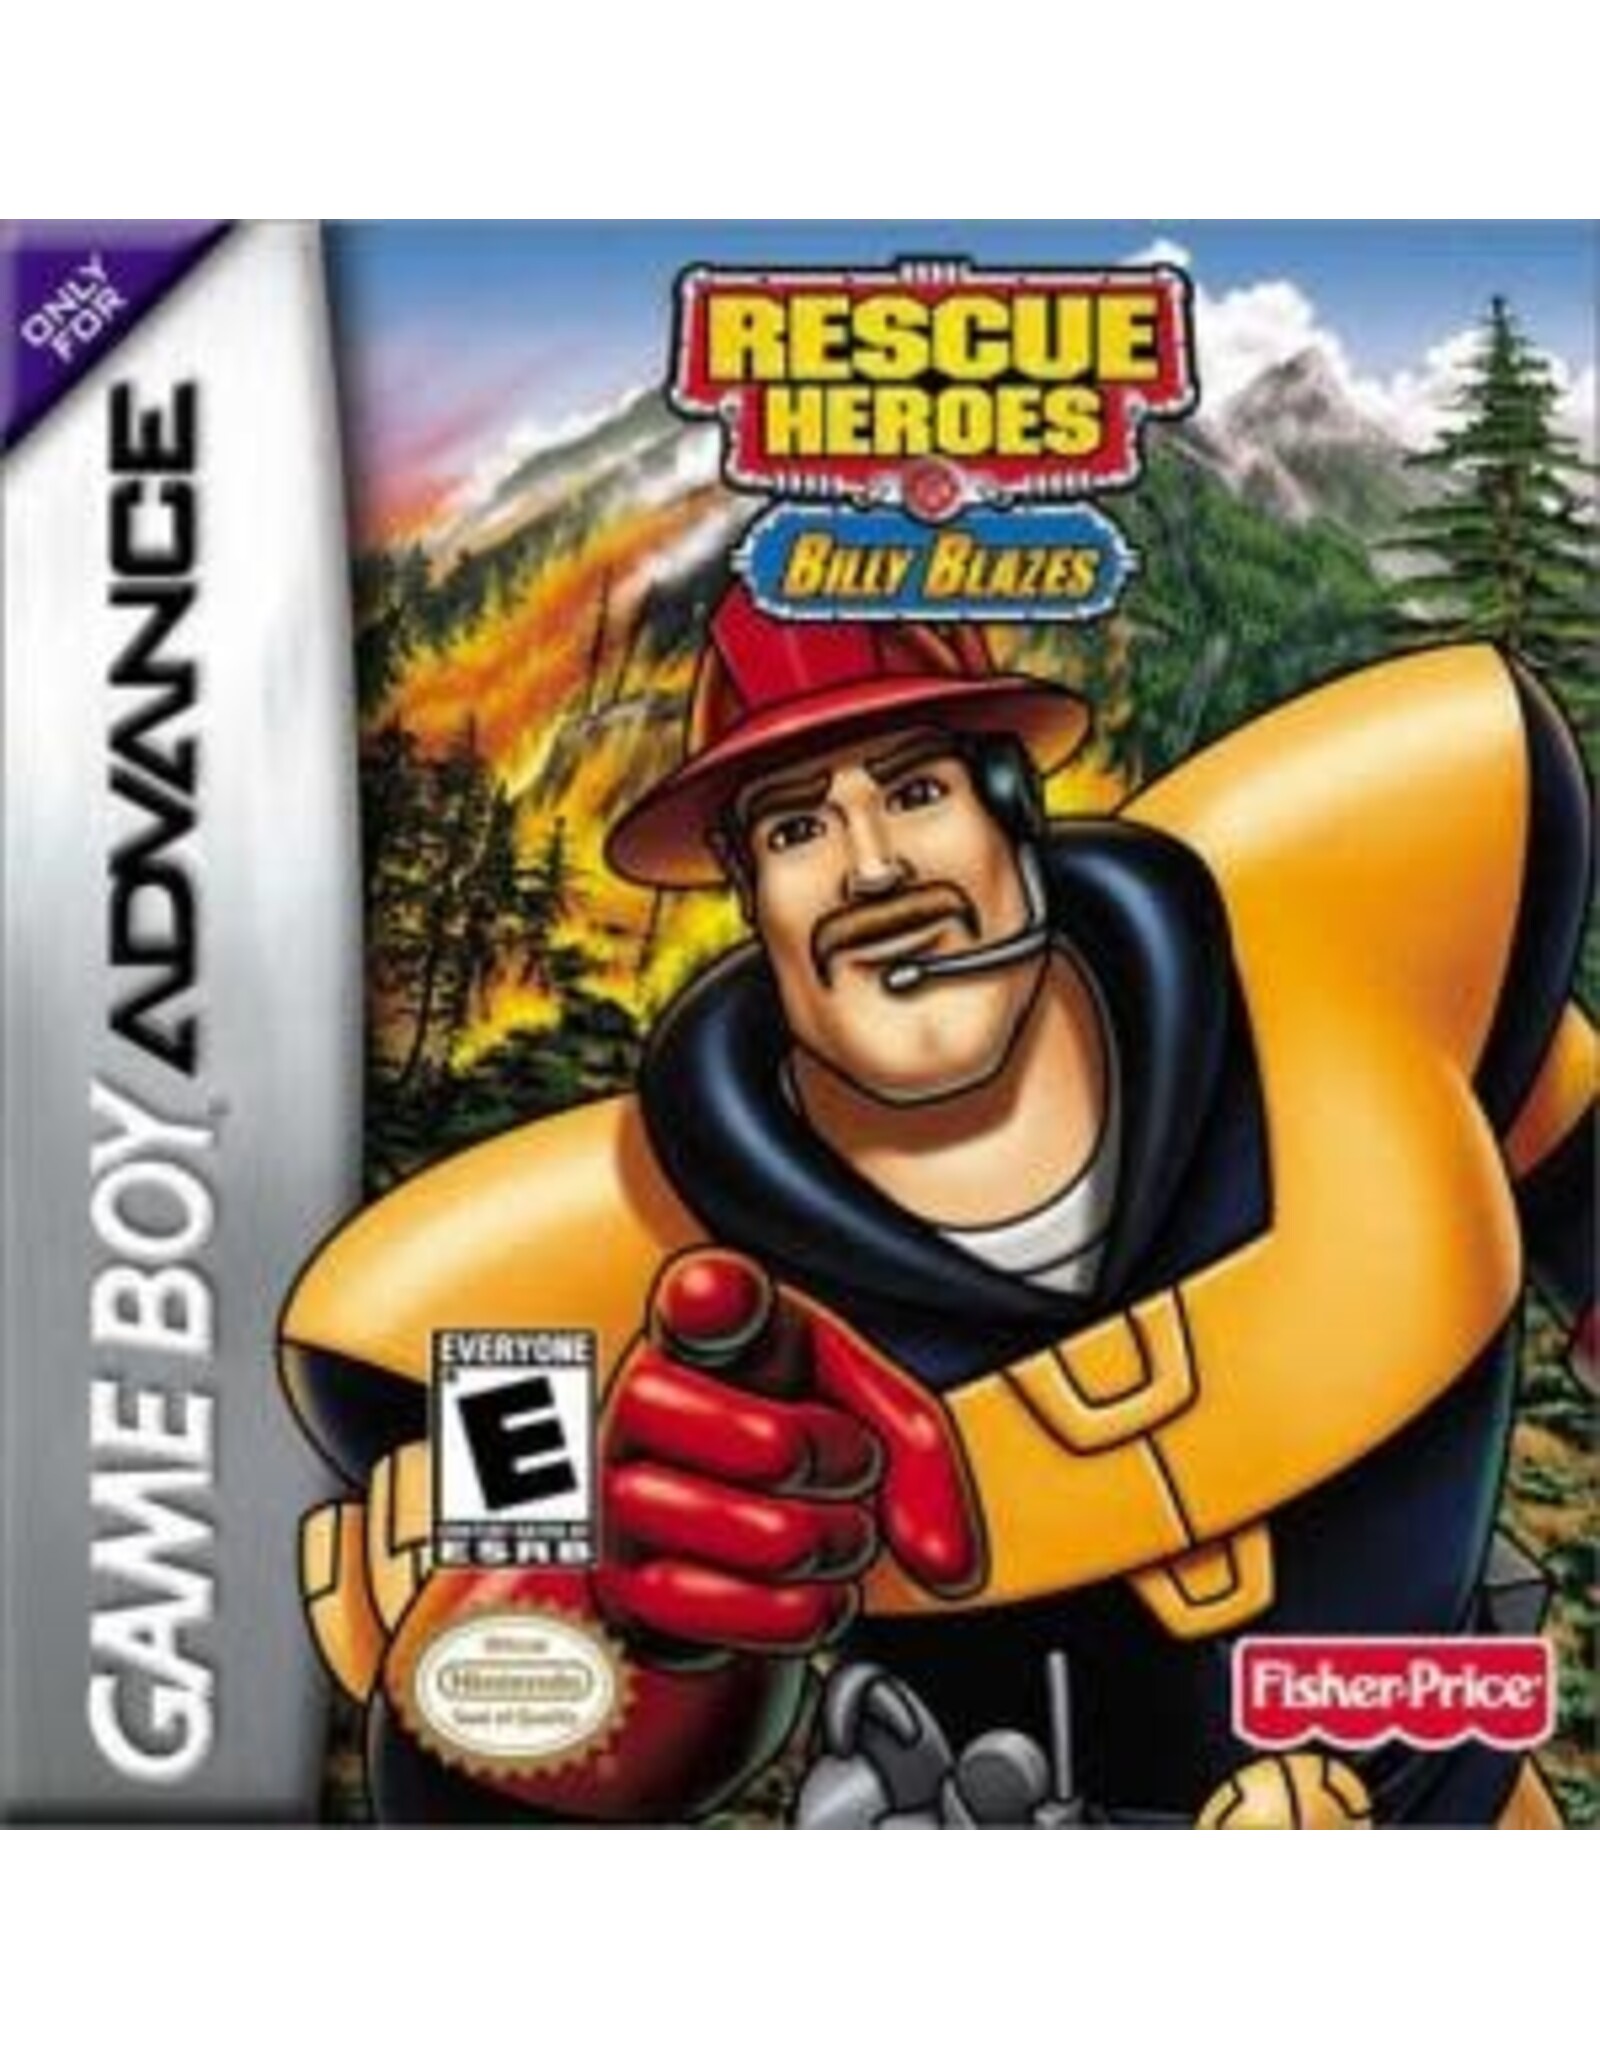 Game Boy Advance Rescue Heroes Billy Blazes (Cart Only, Damaged Label)